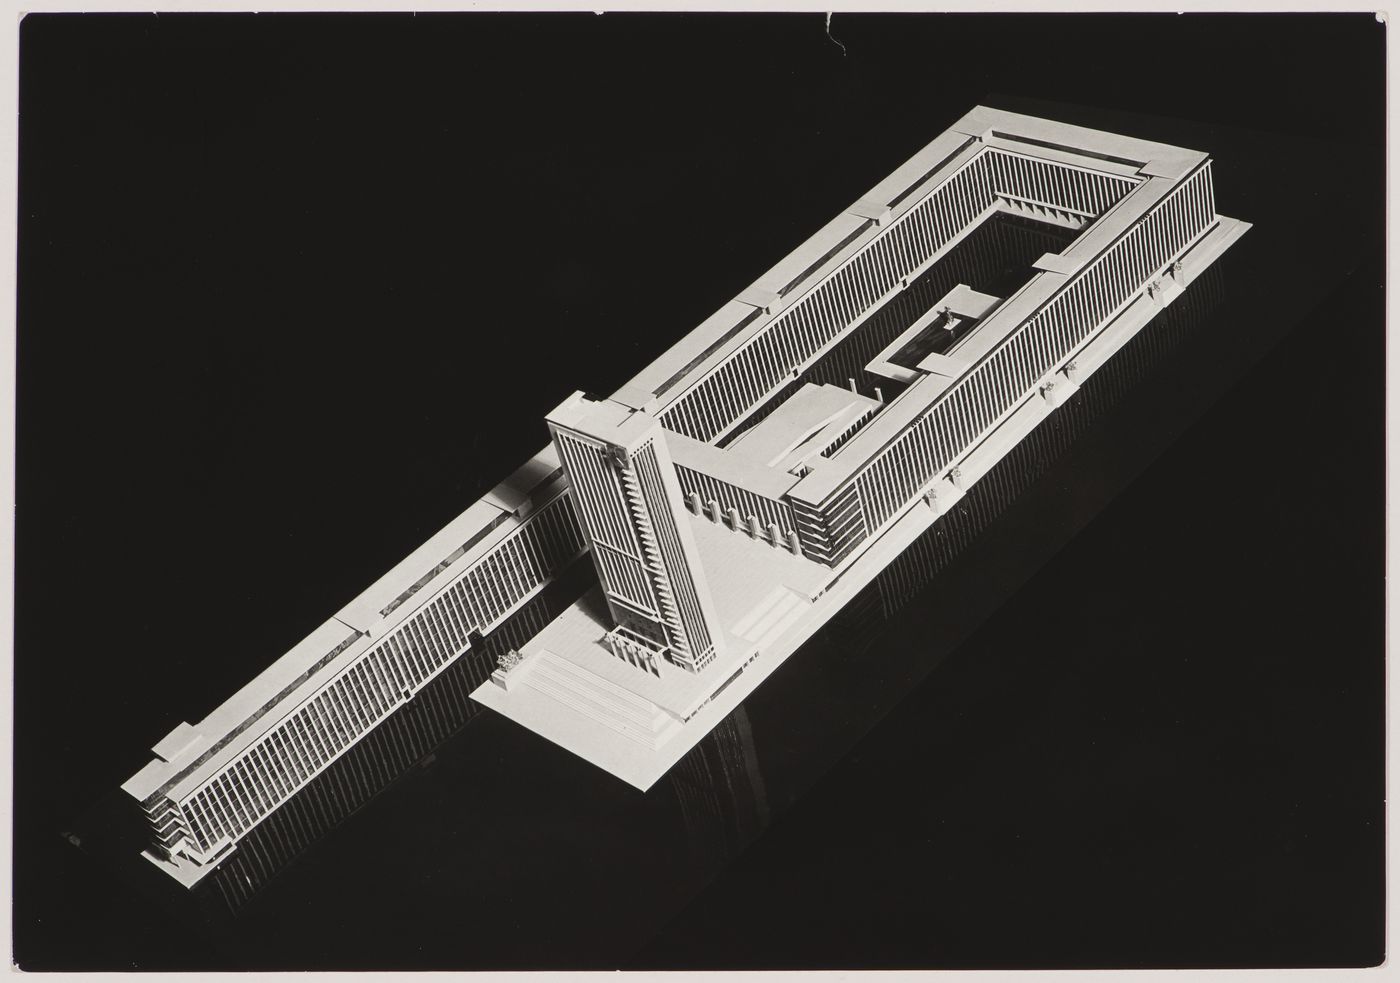 Photograph of a model for the Building of Industry, Sverdlovsk, Soviet Union (now Ekaterinburg, Russia)